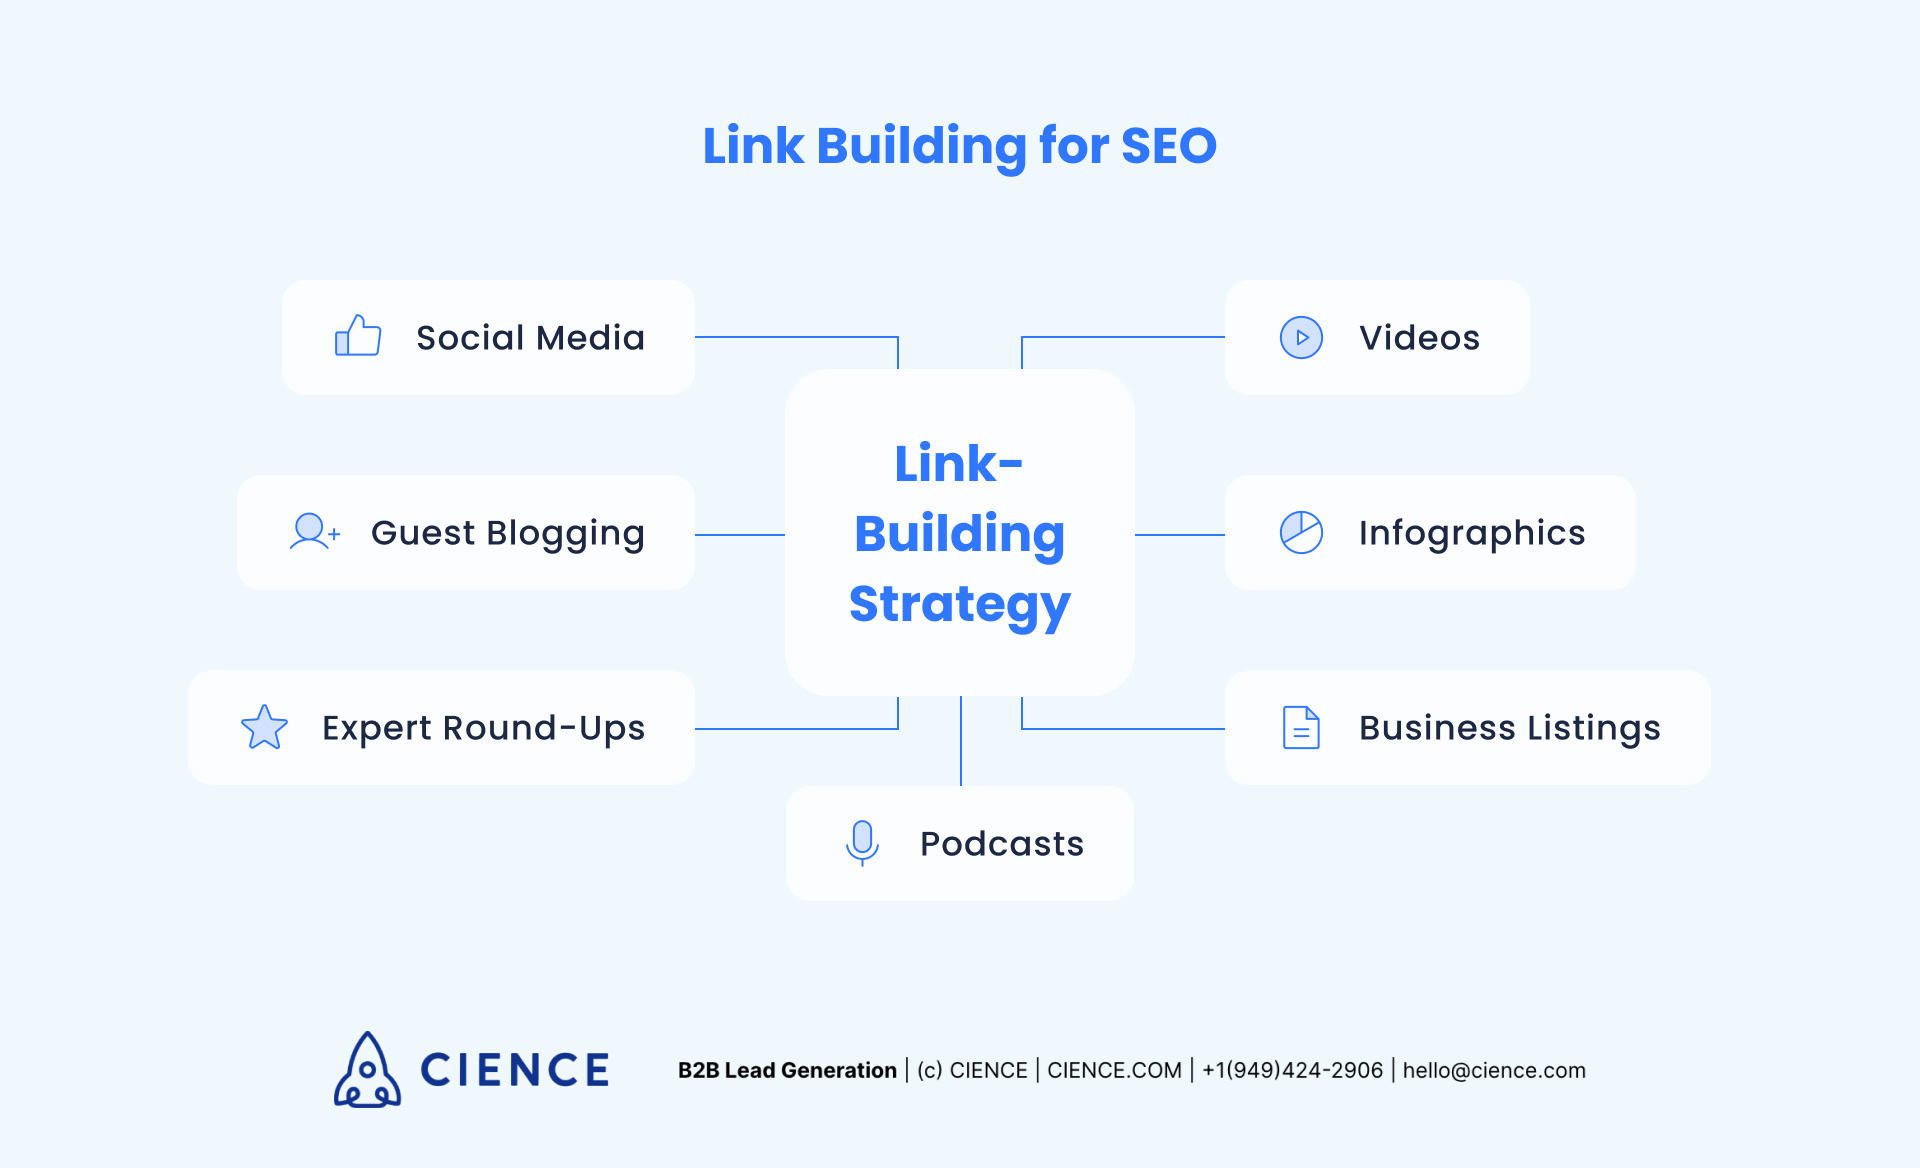 SEO Link Building Strategies: Guest Blogging, Social MEdia, Expert Round-Ups, Videos, Podcasts, Infographics, Business Listings